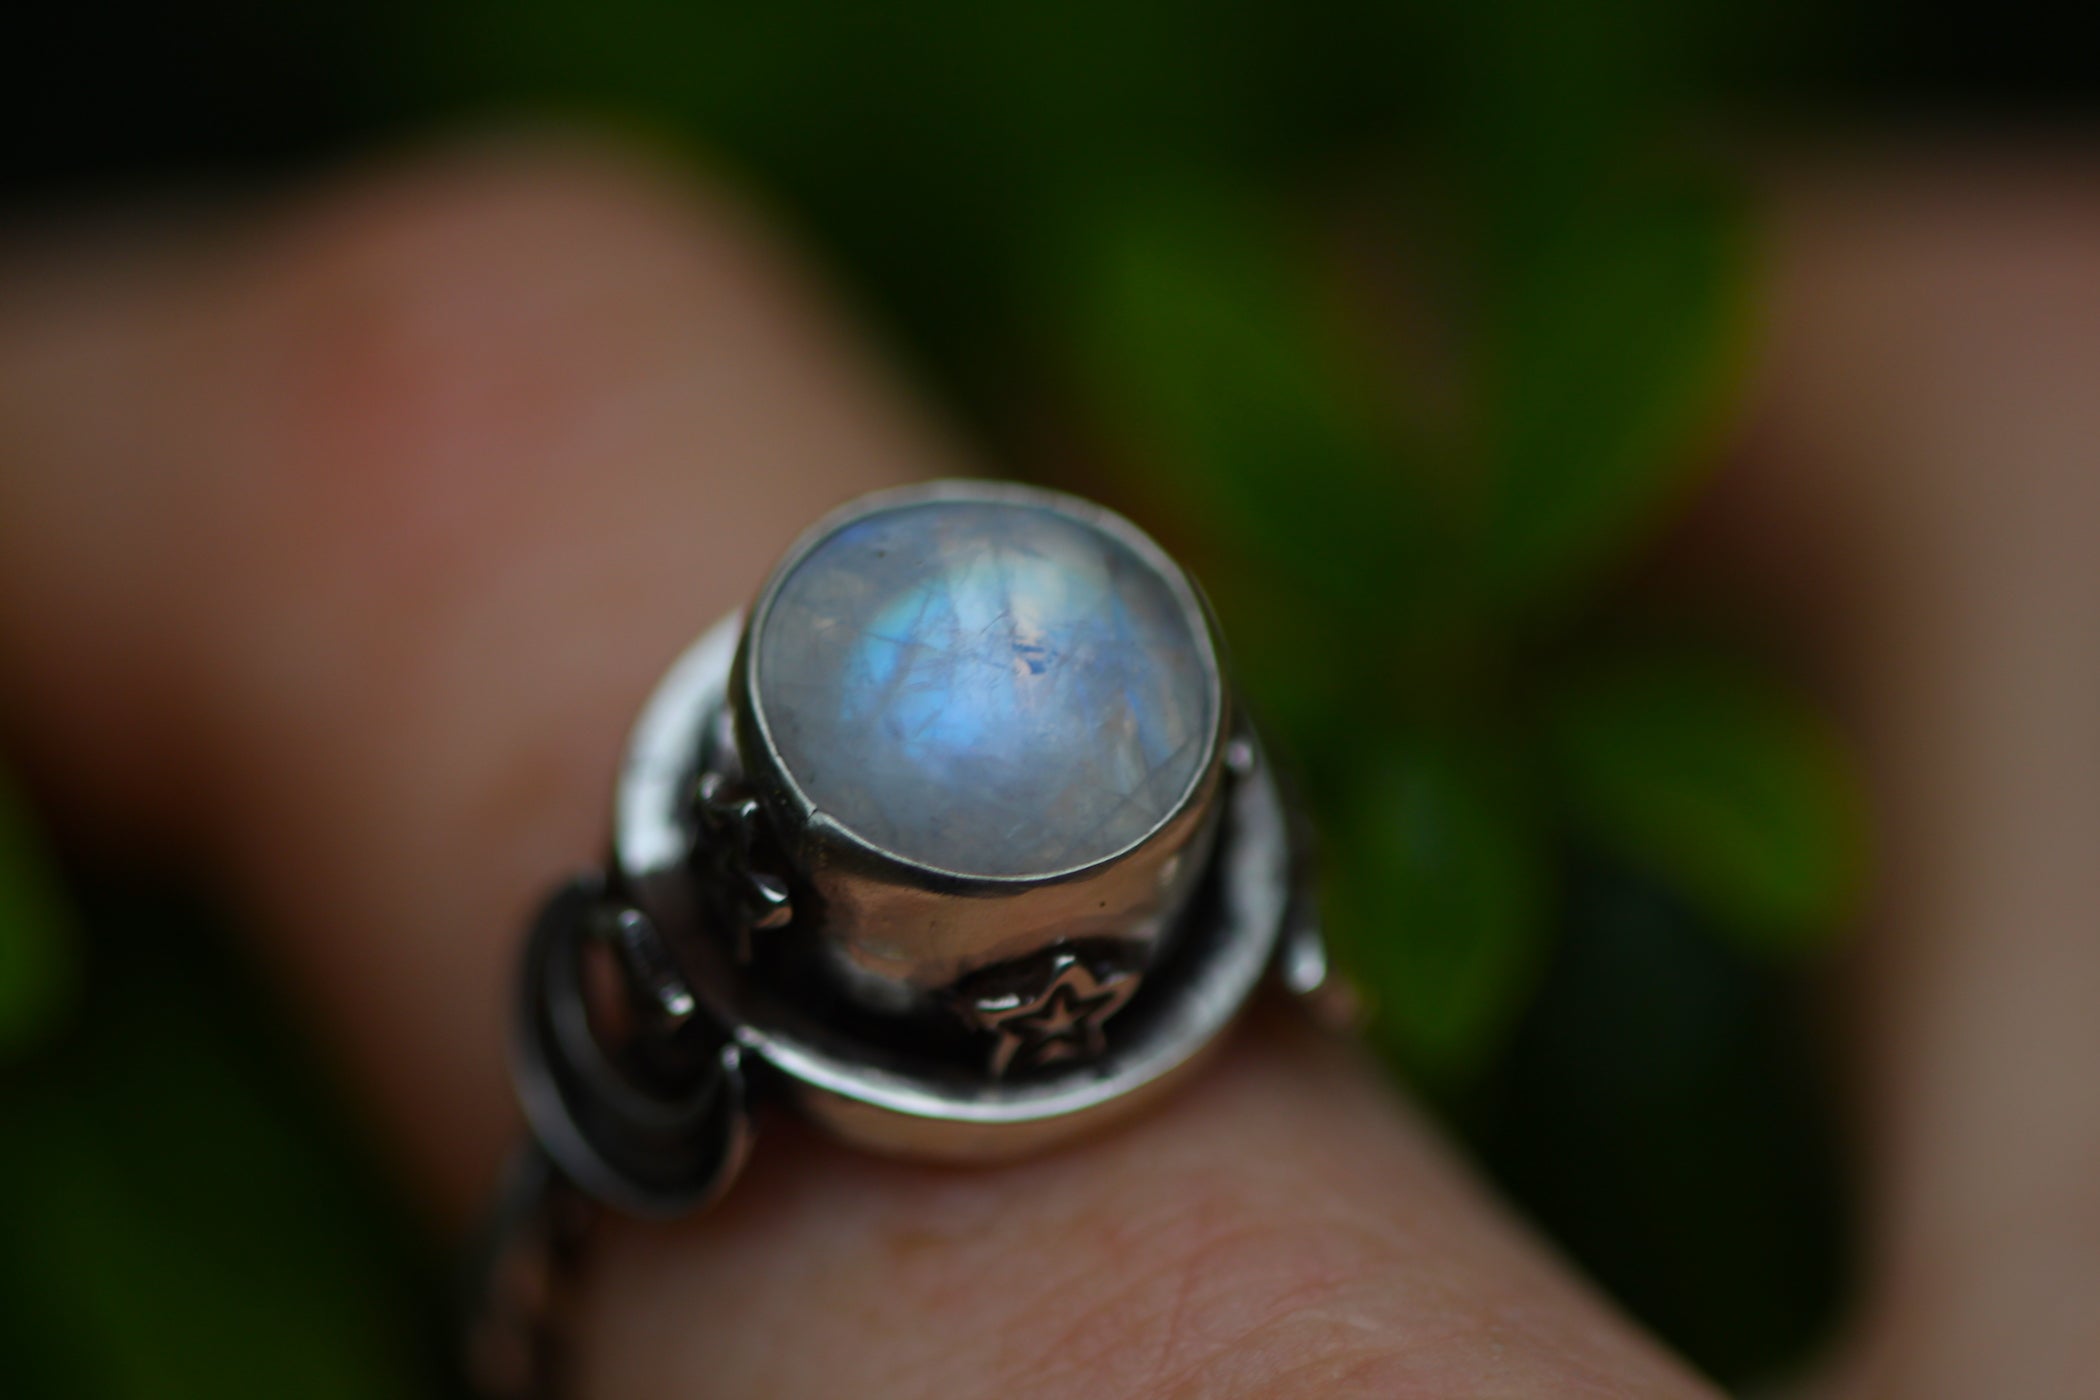 SAMHAIN BLUE MOON Handmade Sterling Silver Ring with Rainbow Moonstone - Size O/7